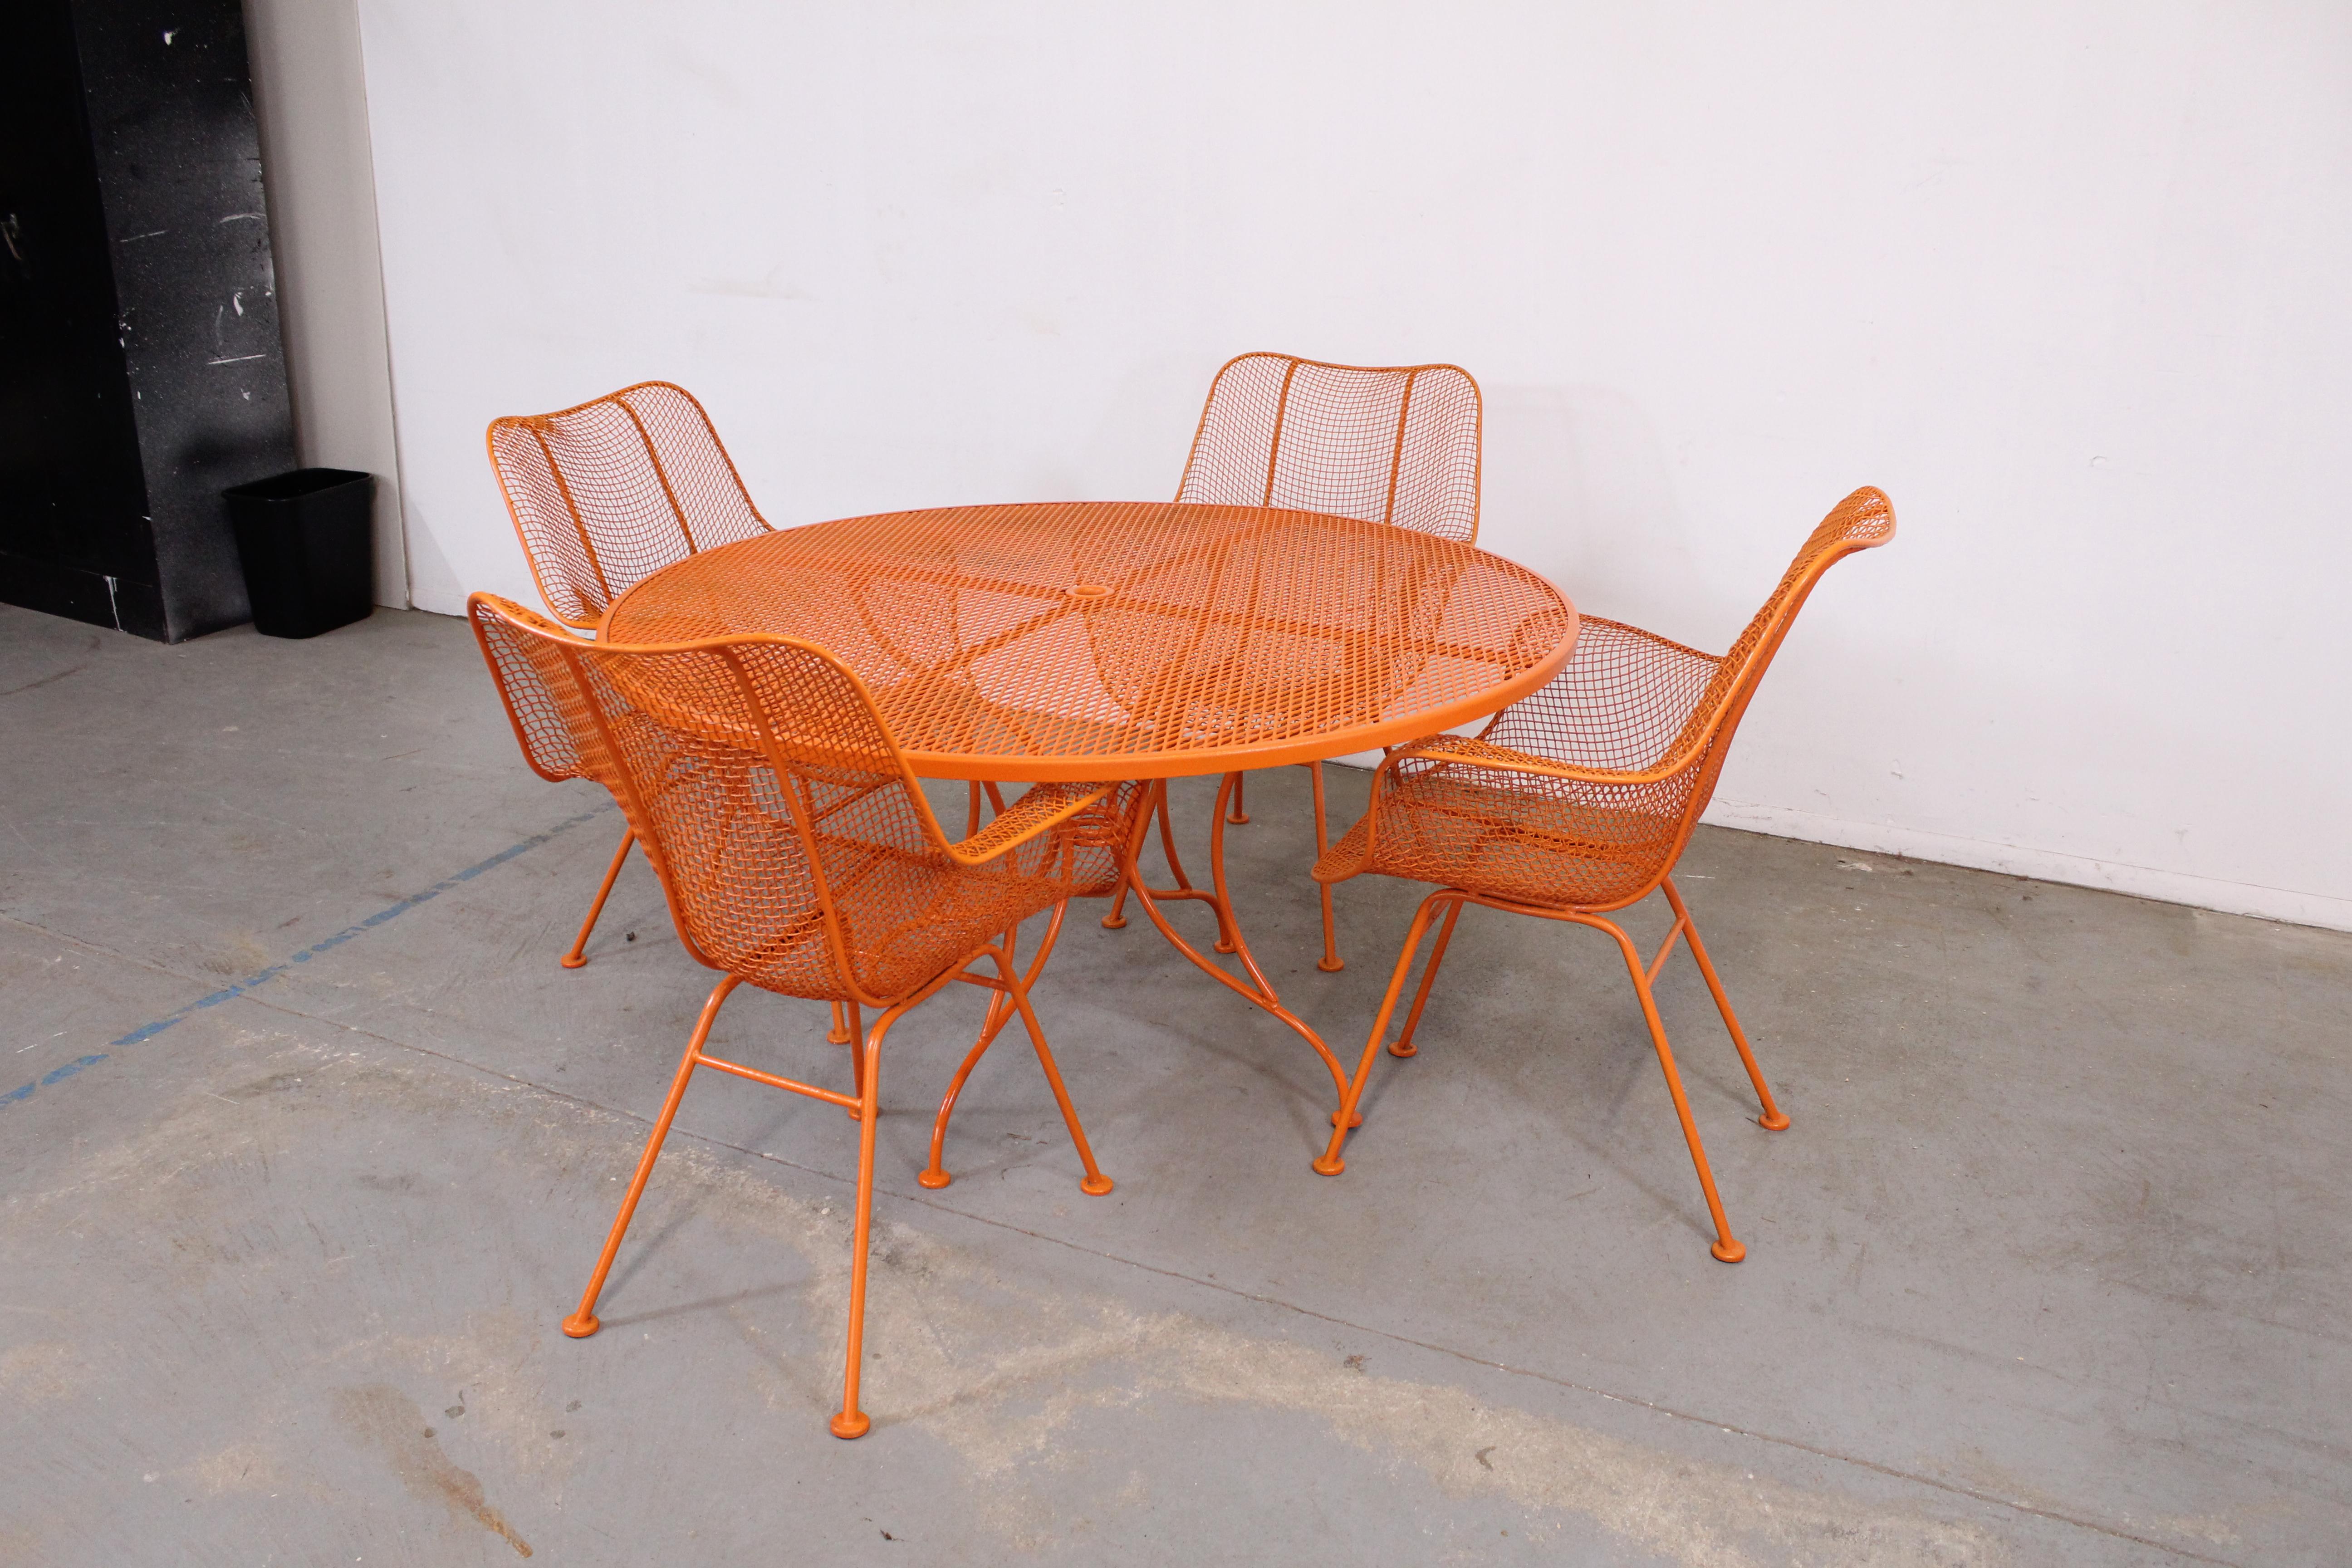 Mid-Century Modern atomic Woodard Sculptura table and chairs.

What a find. Offered is a set of 4 vintage Mid-Century Modern outdoor circle chairs paired with a table. Includes four metal chairs with hoop mesh backs and seats that have been